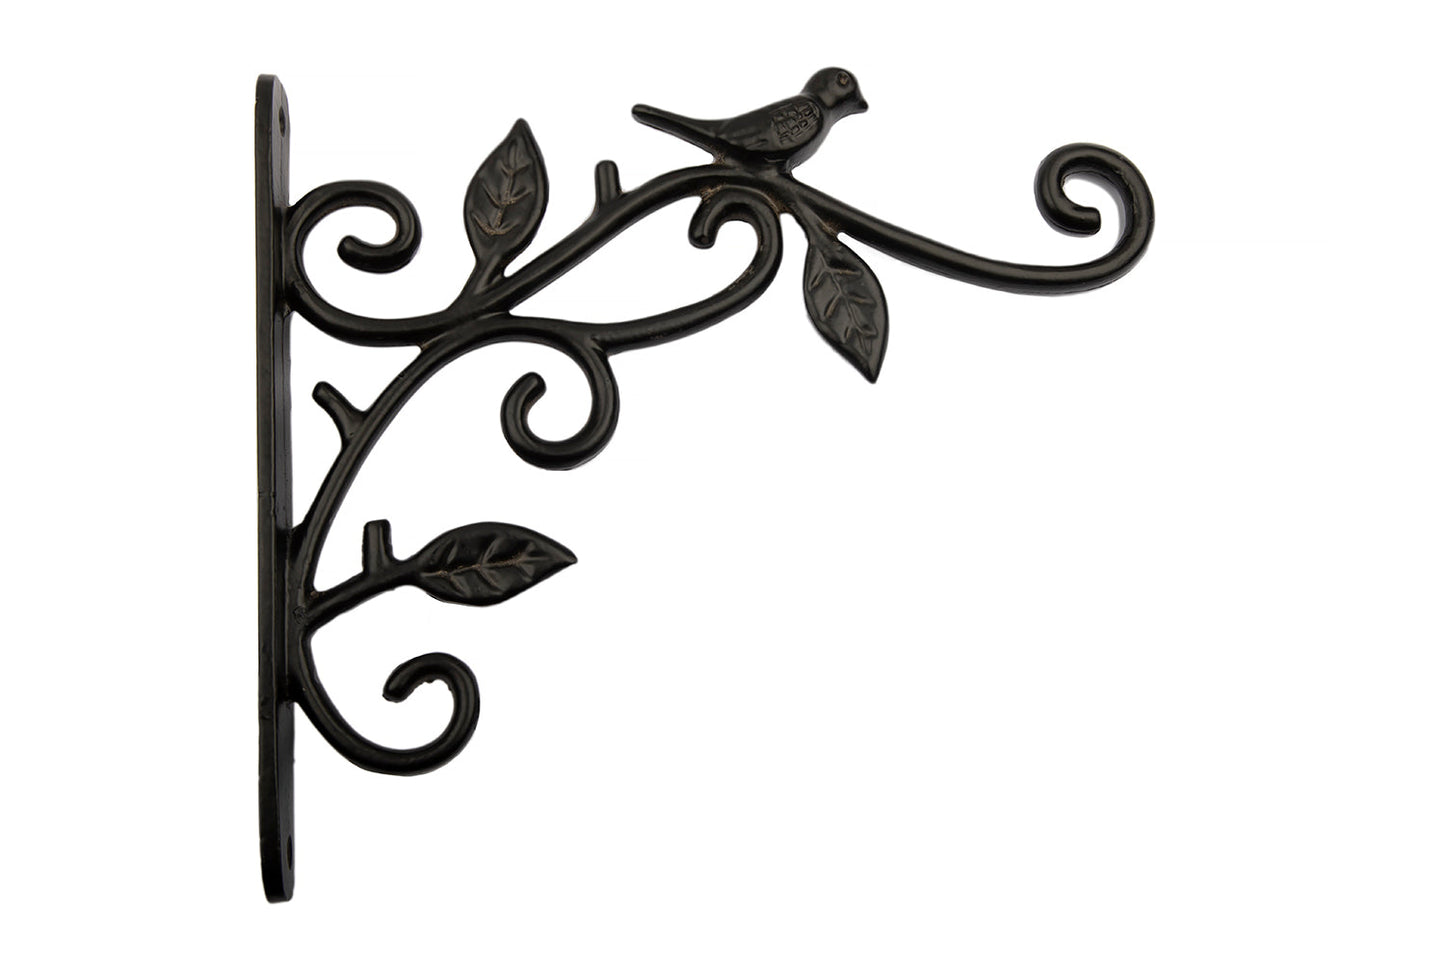 Bird Scroll Planter in Cast Iron with a decorative leaf design in solid cast iron